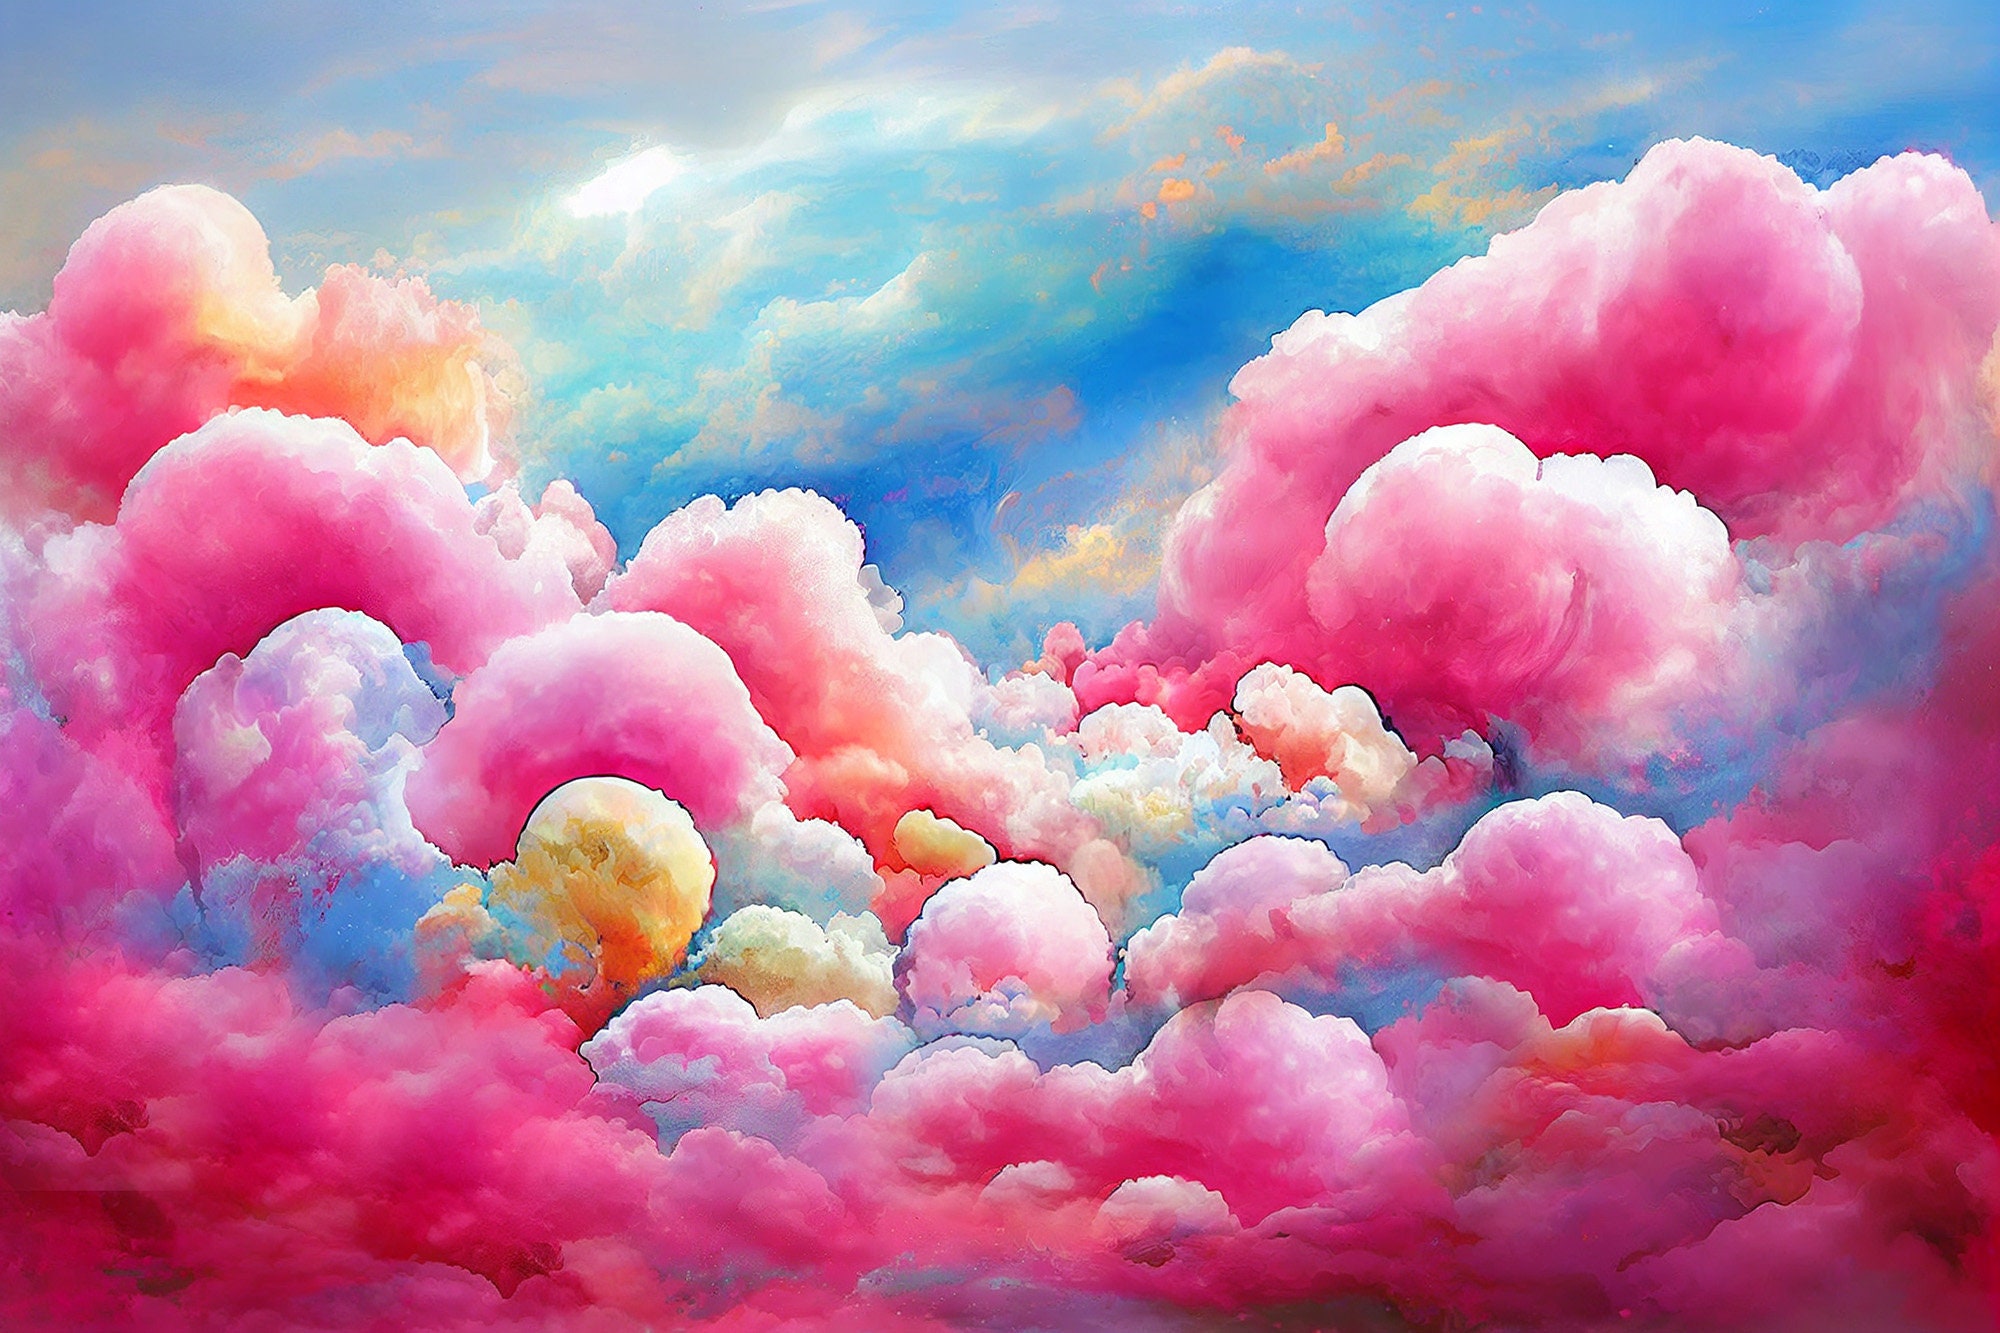 Pink and Blue Cotton Clouds Graphic by jijopero · Creative Fabrica